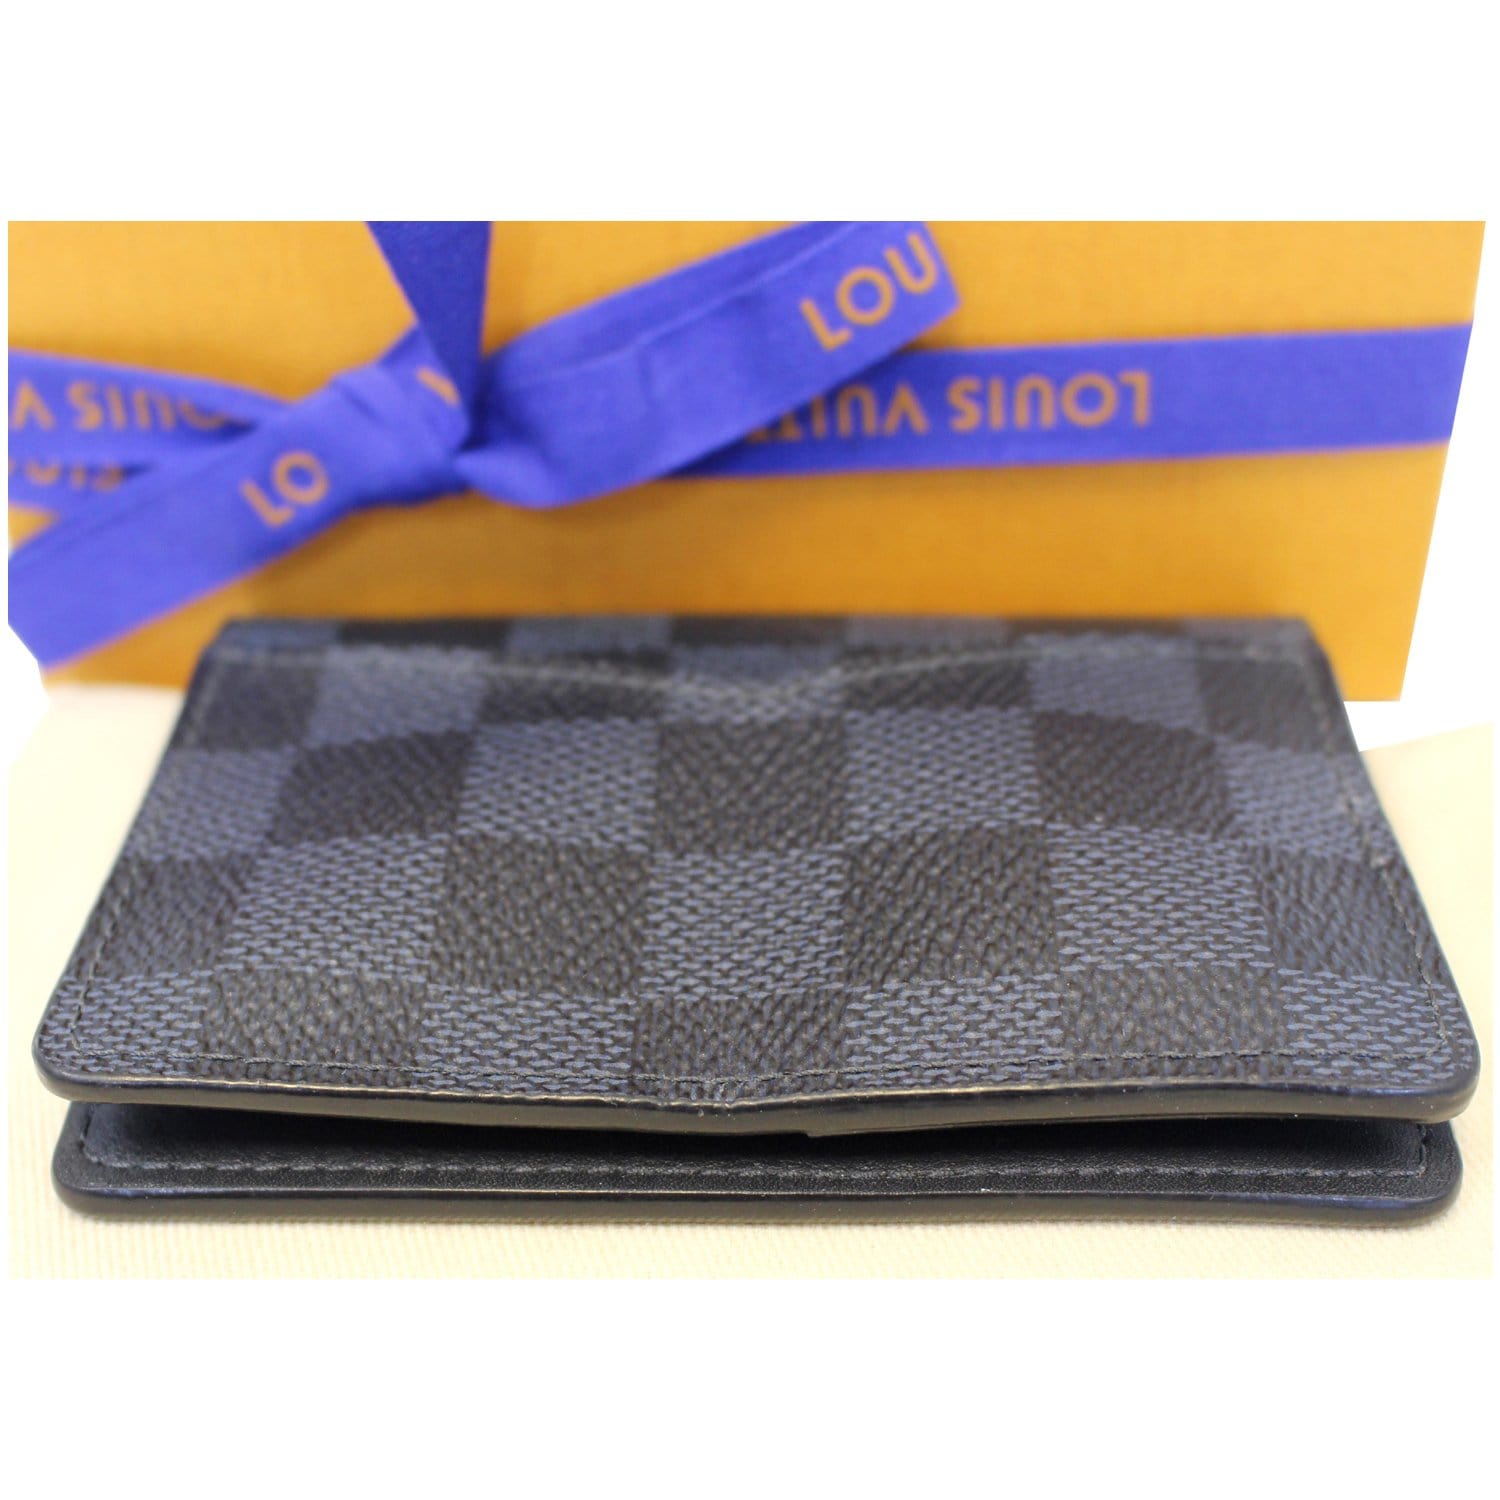 Pocket Organizer Damier Graphite Canvas - Wallets and Small Leather Goods